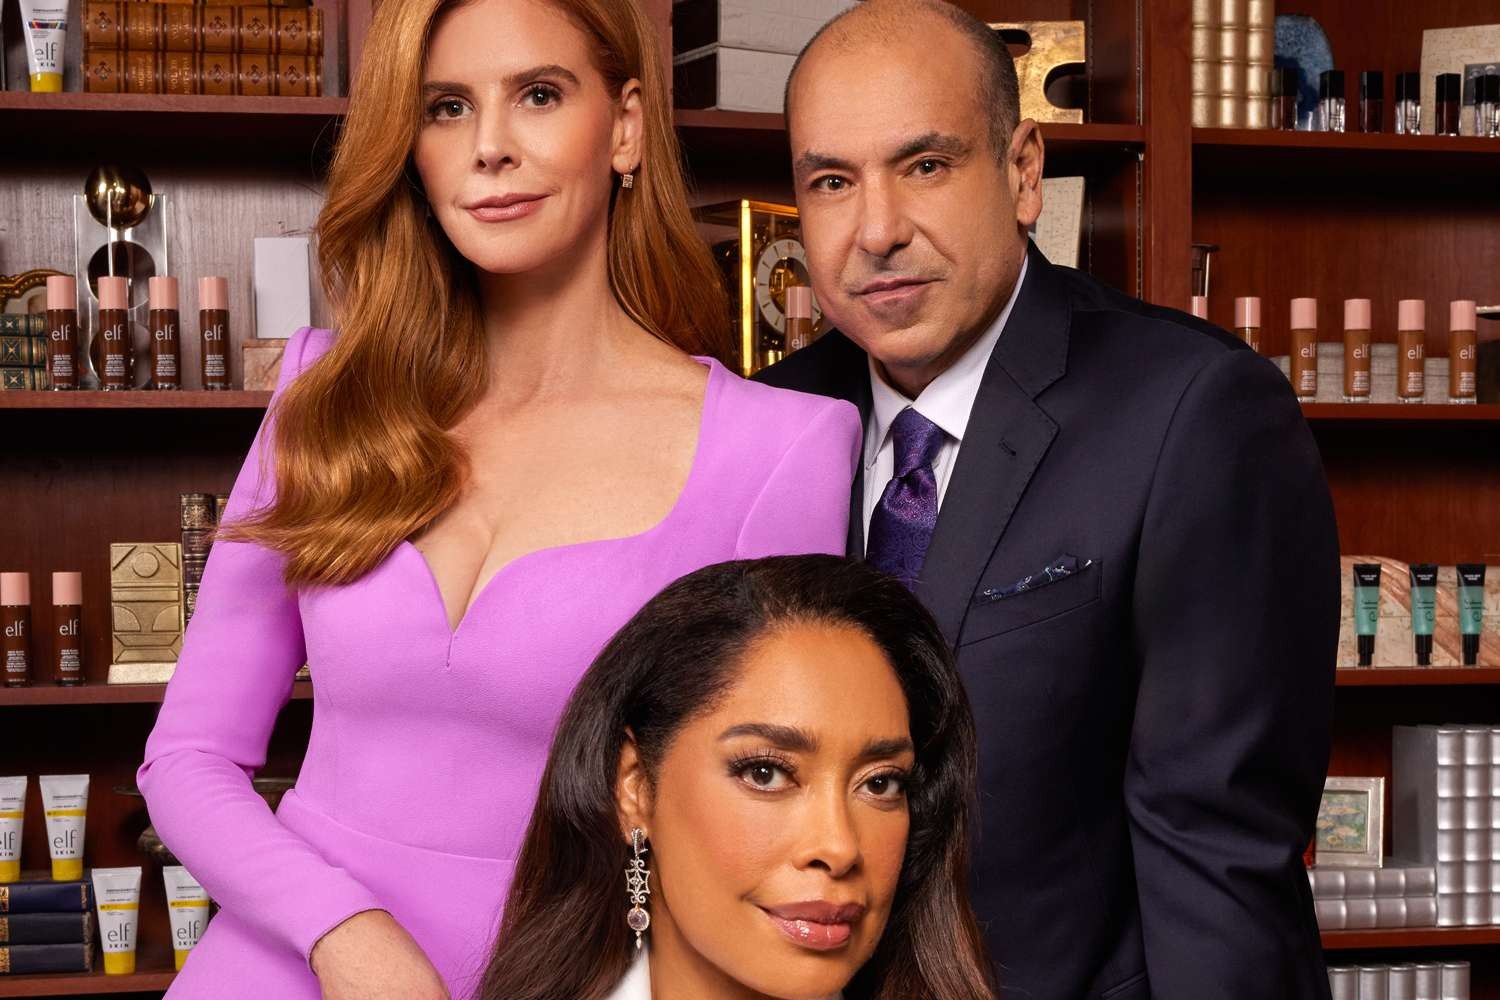 Suits co-stars Sarah Rafferty, Gina Torres and Rick Hoffman for e.l.f. Cosmetics